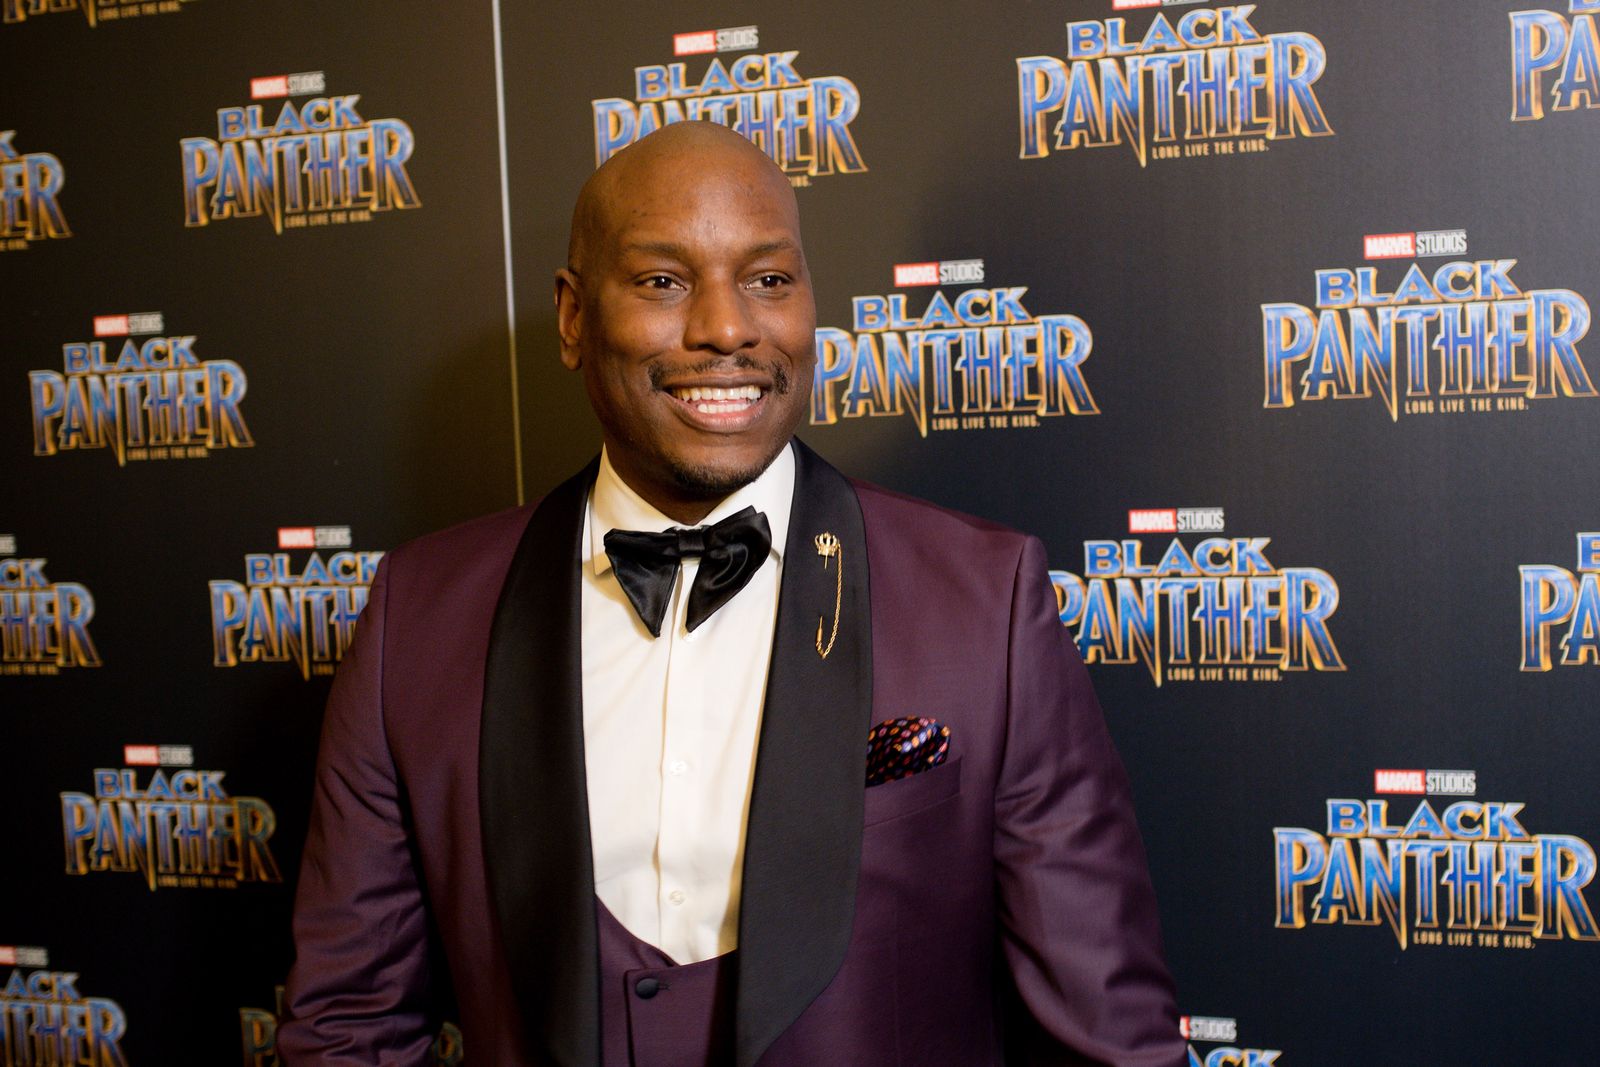 Singer Tyrese Gibson at the Marvel Studios "Black Panther" Atlanta movie screening at The Fox Theatre on February 7, 2018 | Photo: Getty Images